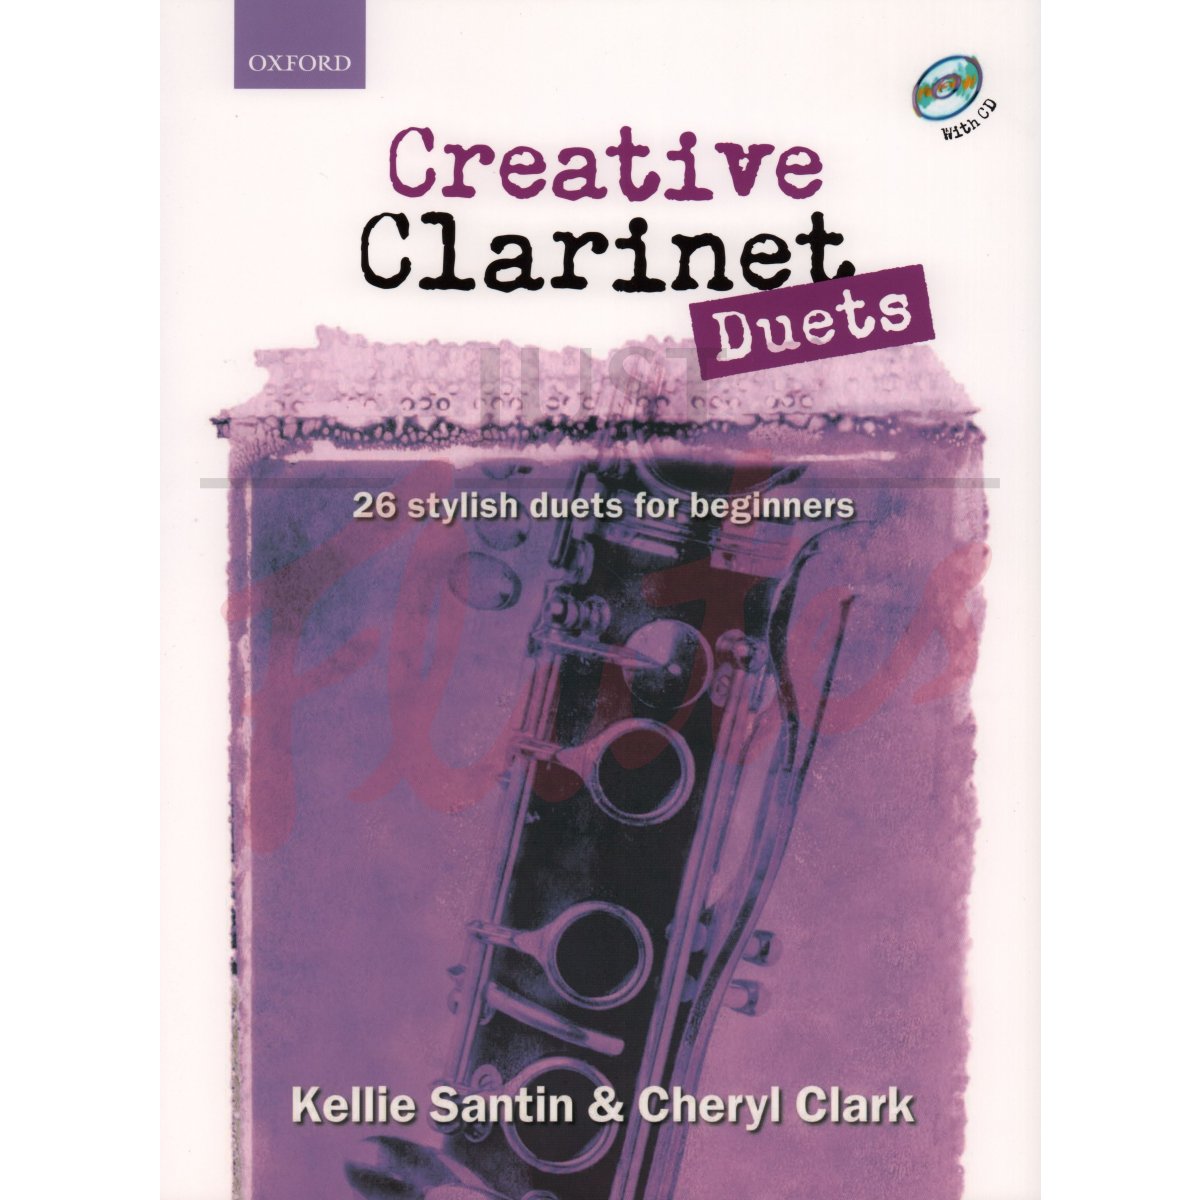 Creative Clarinet Duets: 26 Stylish Duets for Beginners